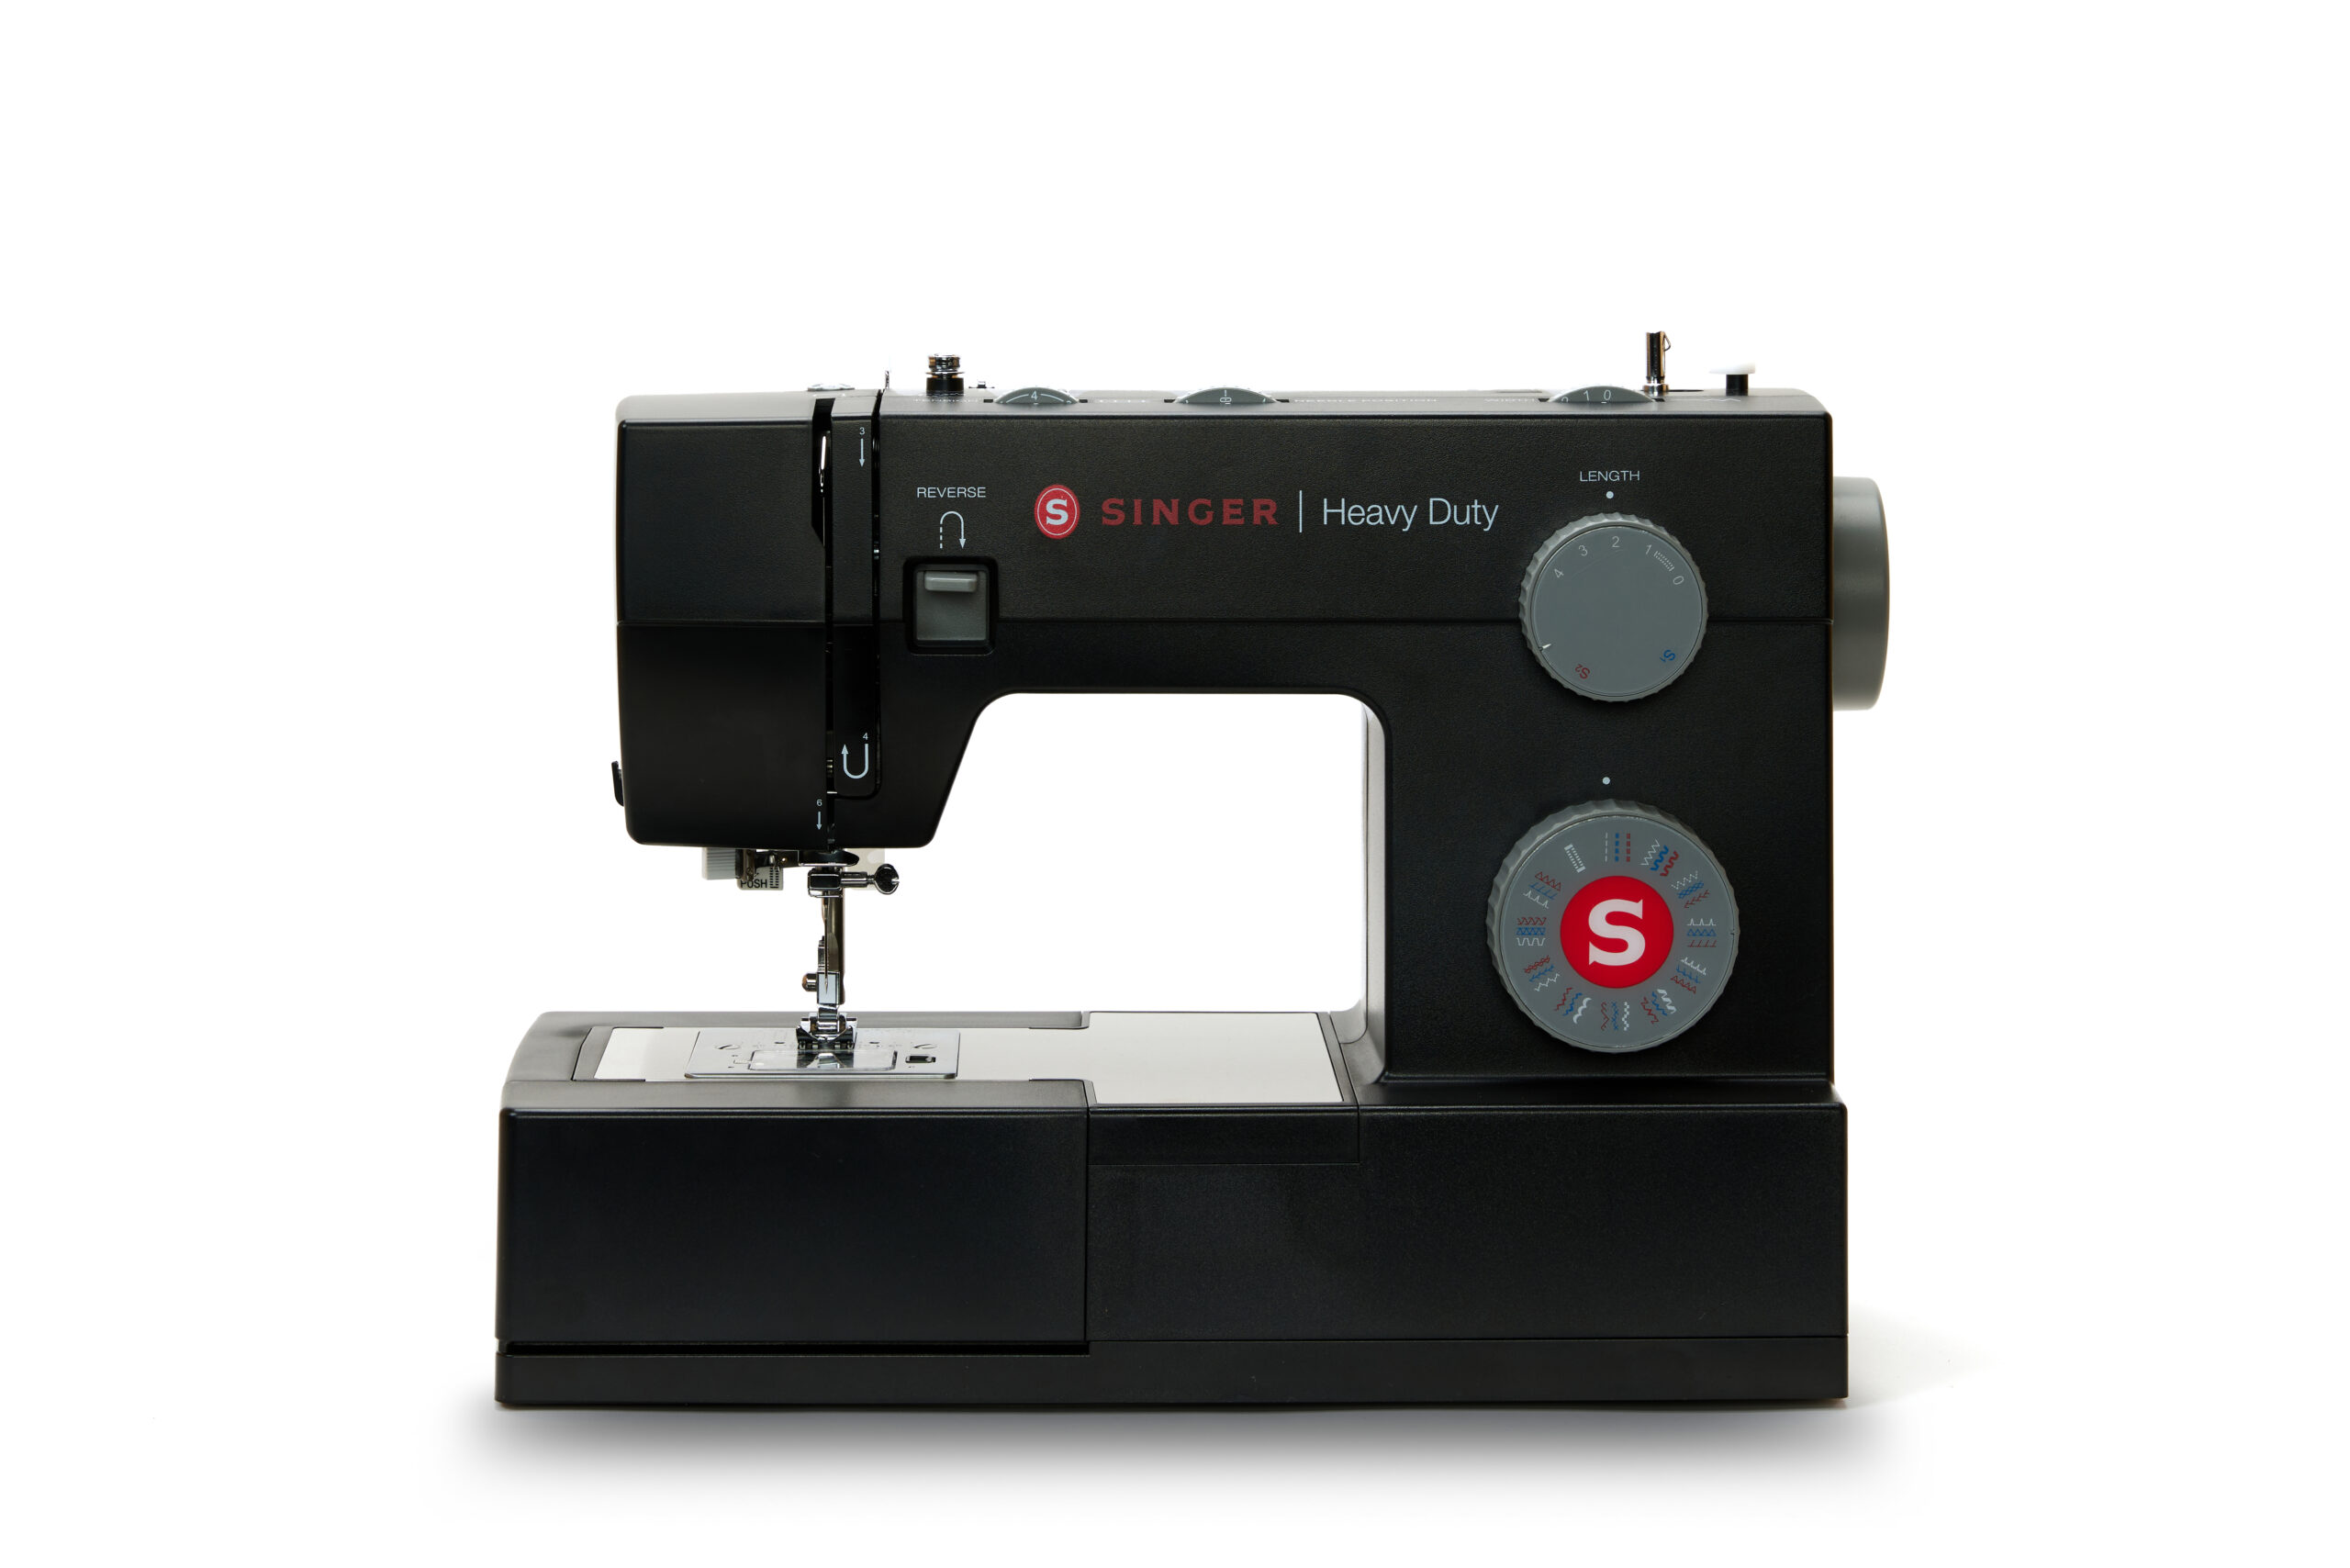 SINGER | Heavy Duty 4452 Sewing Machine, Gray & Sew Easy Foot, Sew  perfectly straight lines with ease, Includes Ruler with Adjustable Guide to  set